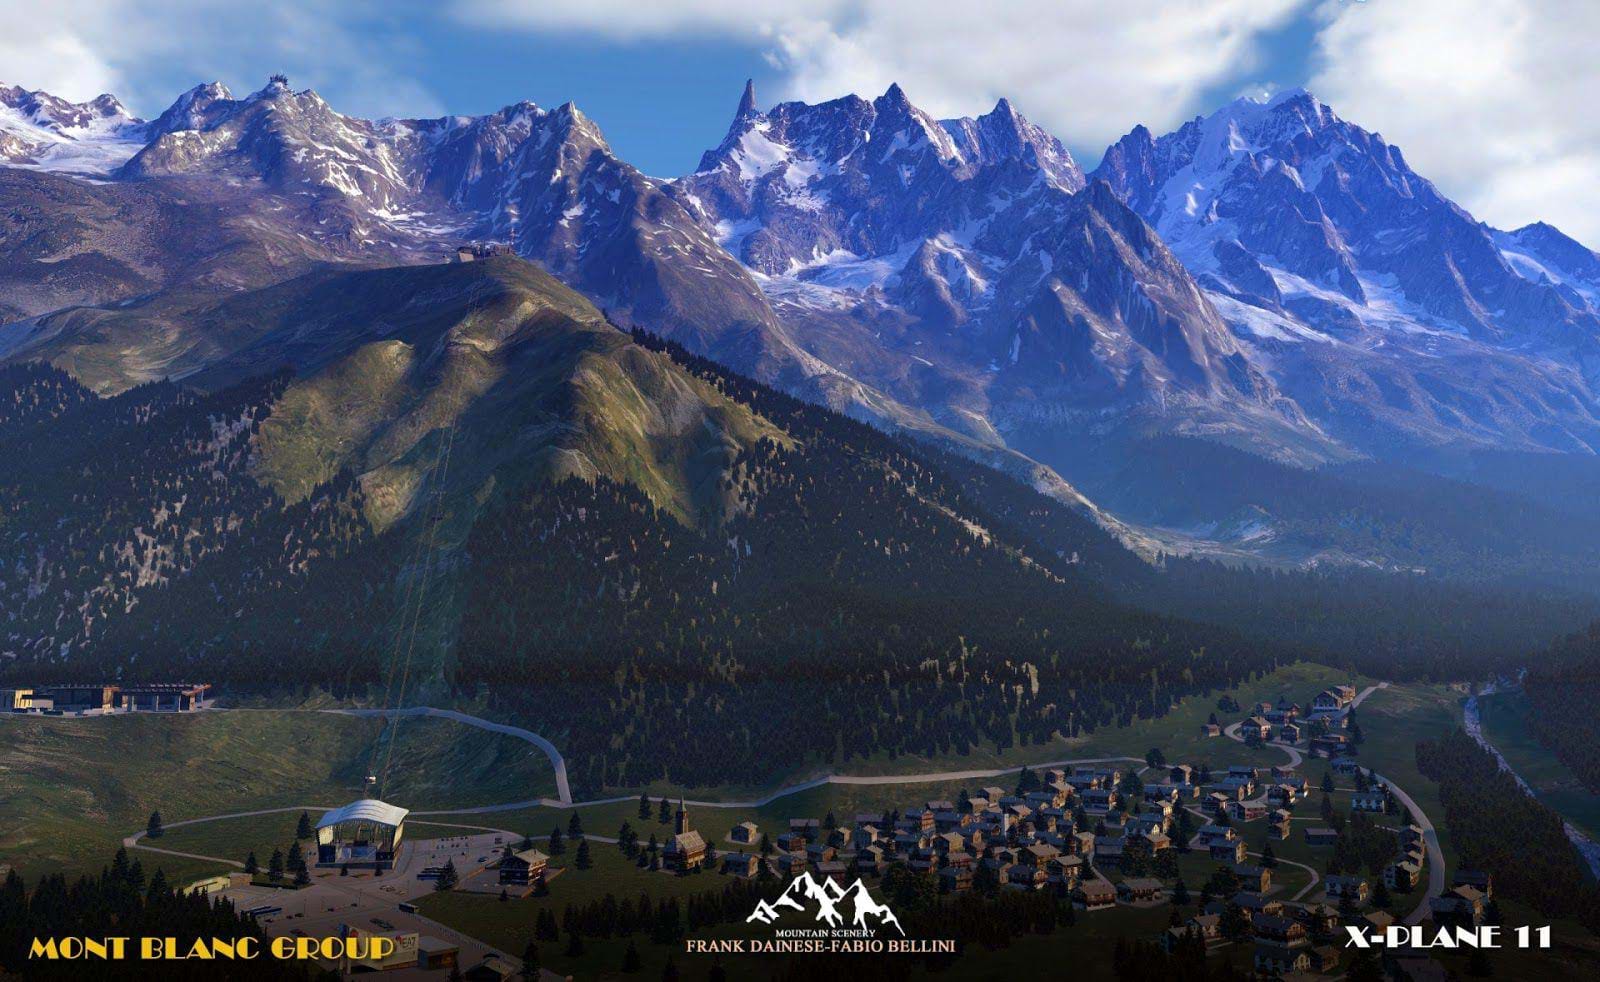 Frank Dainese and Fabio Bellini's next project: Mont Blanc